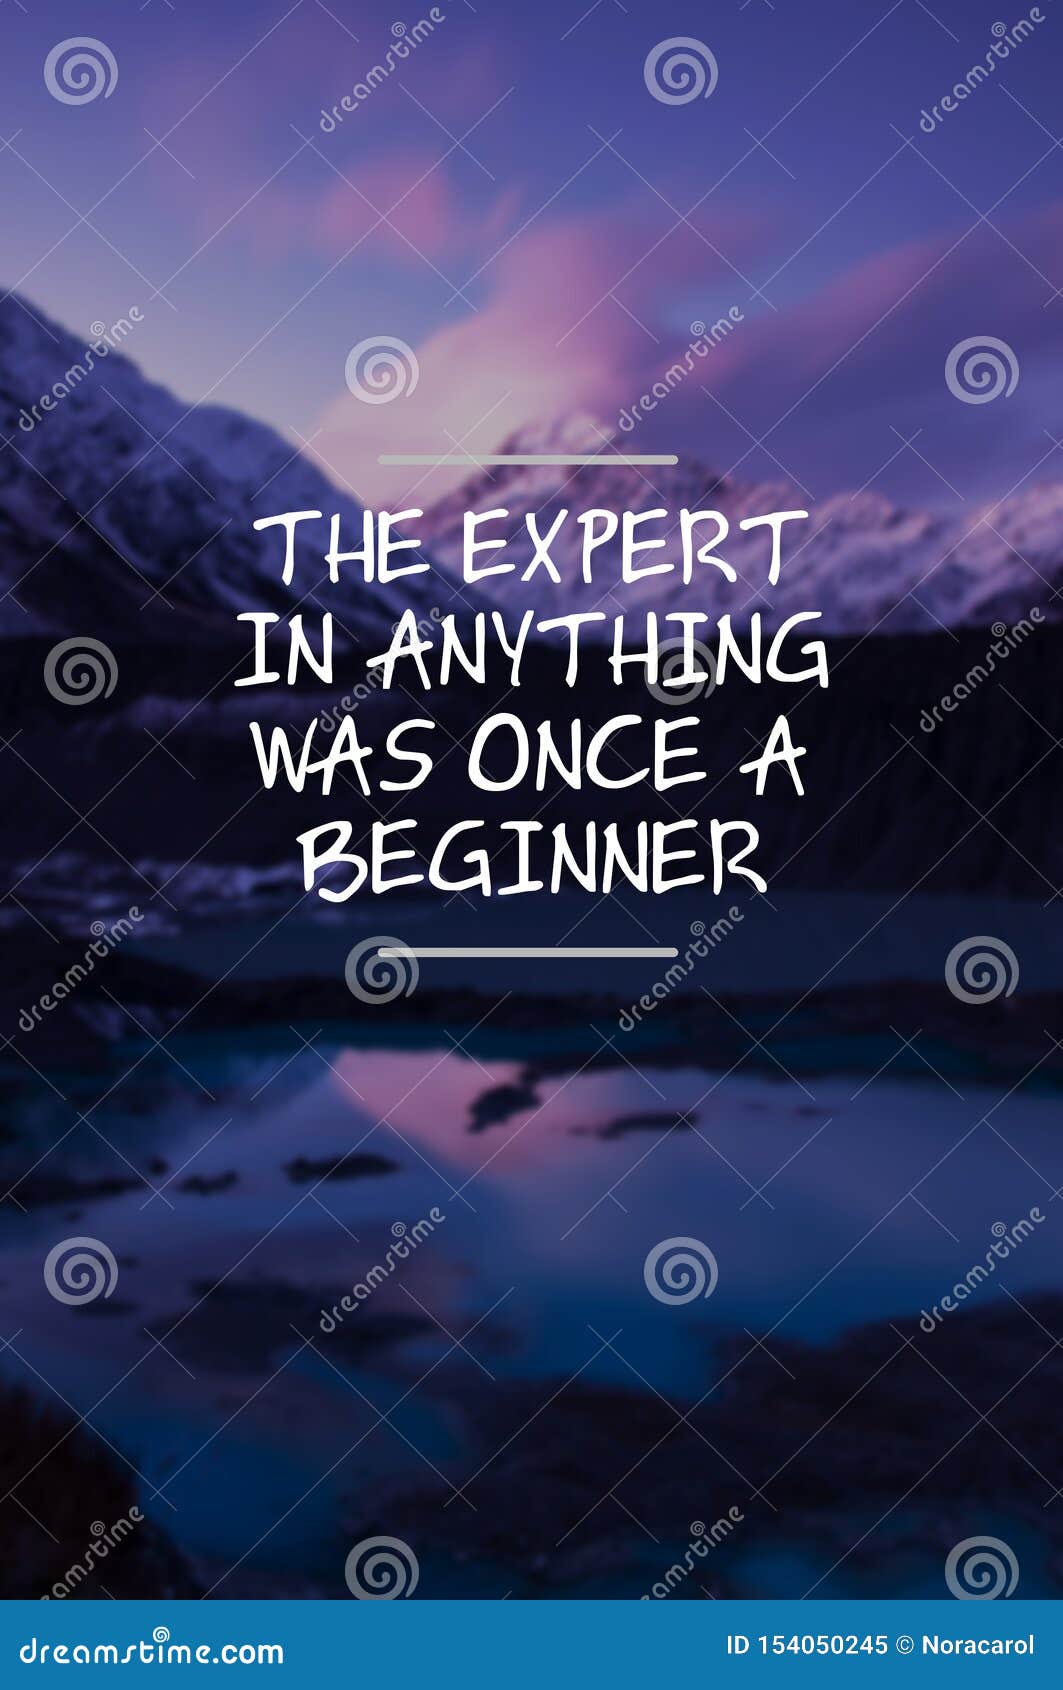 life quotes - the expert in anything was once a beginner